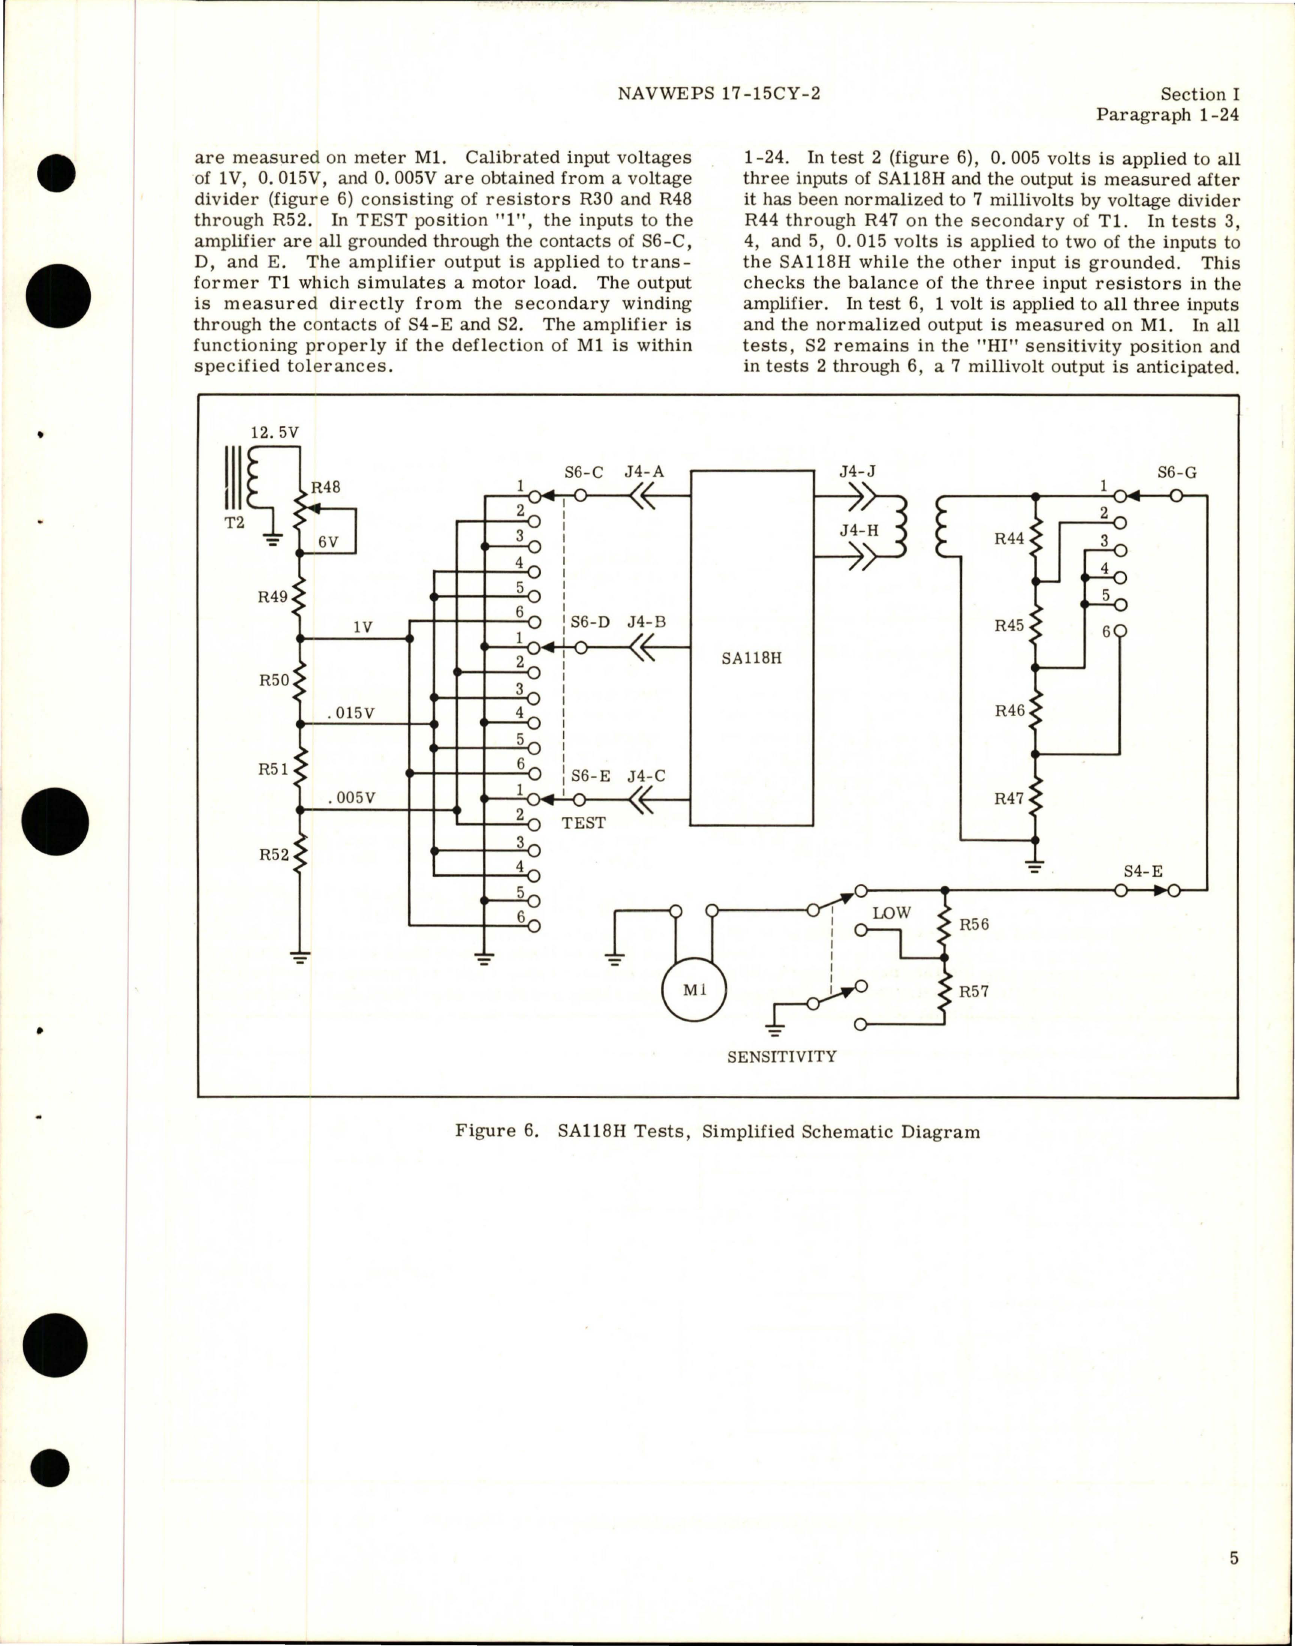 Sample page 9 from AirCorps Library document: Operation & Service Instructions with Illustrated Parts for True Airspeed Computer Test Set - Type WS2020 - Part 816424